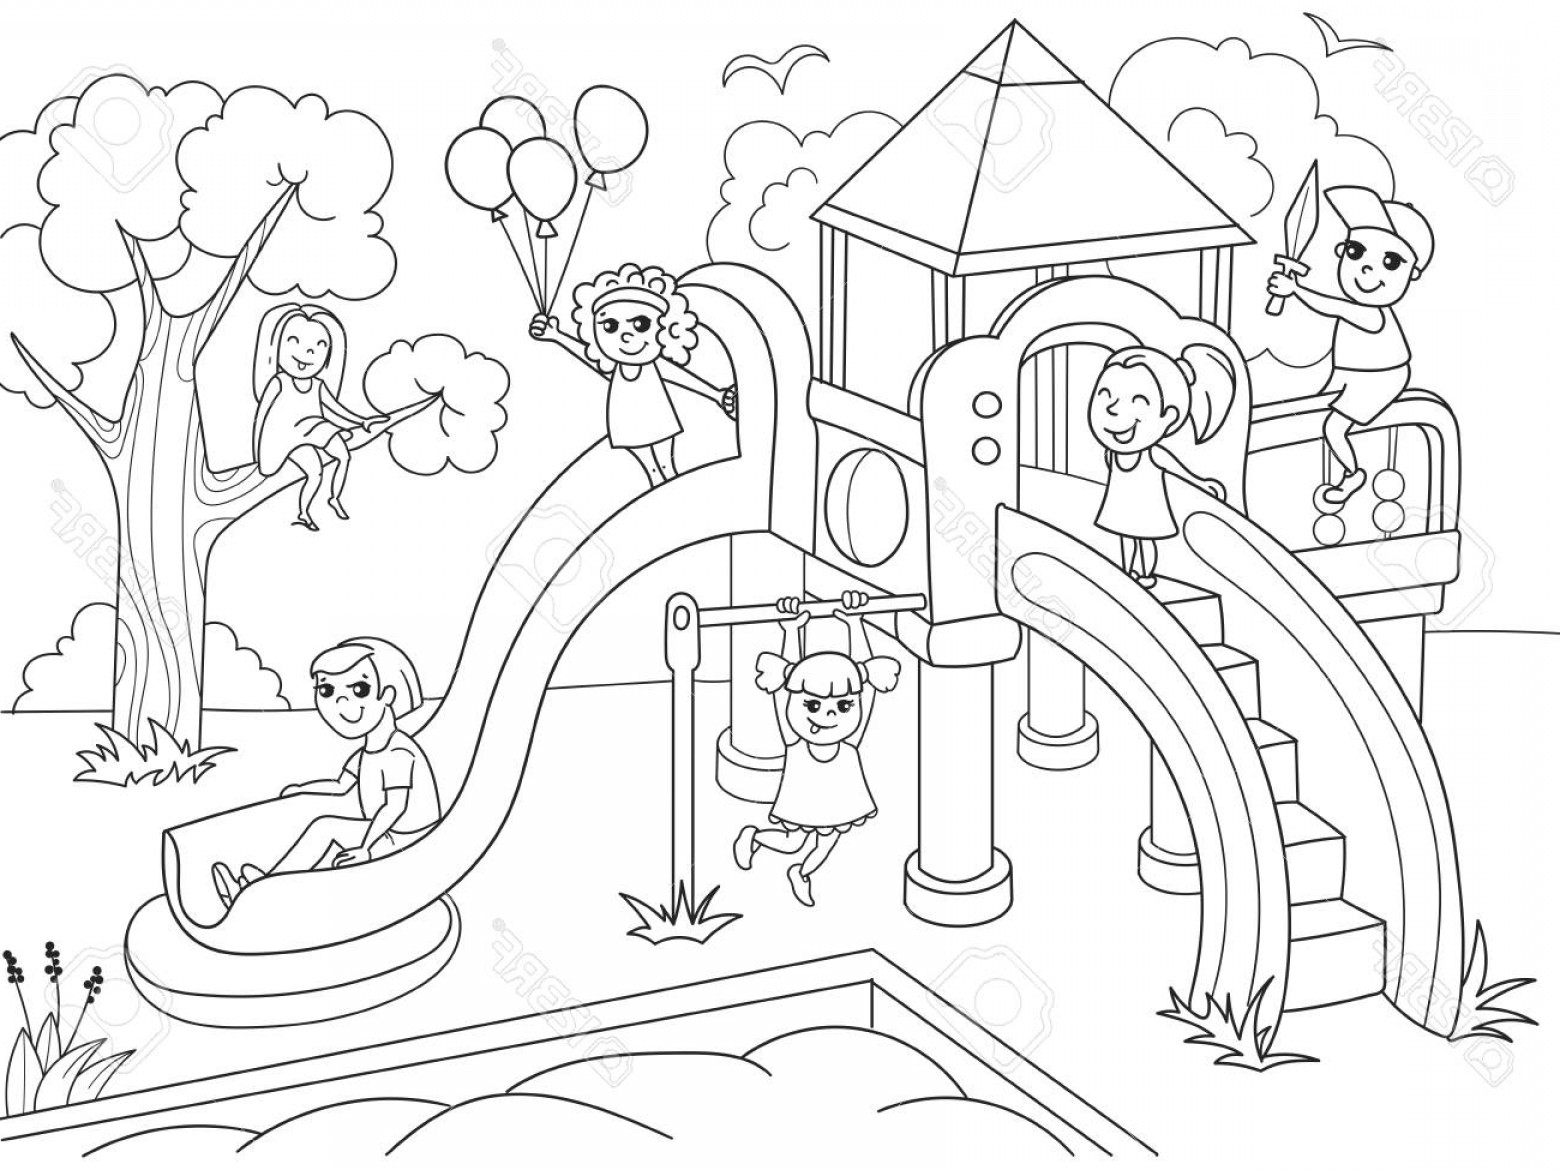 Photostock Vector Childrens Playground Coloring Vector